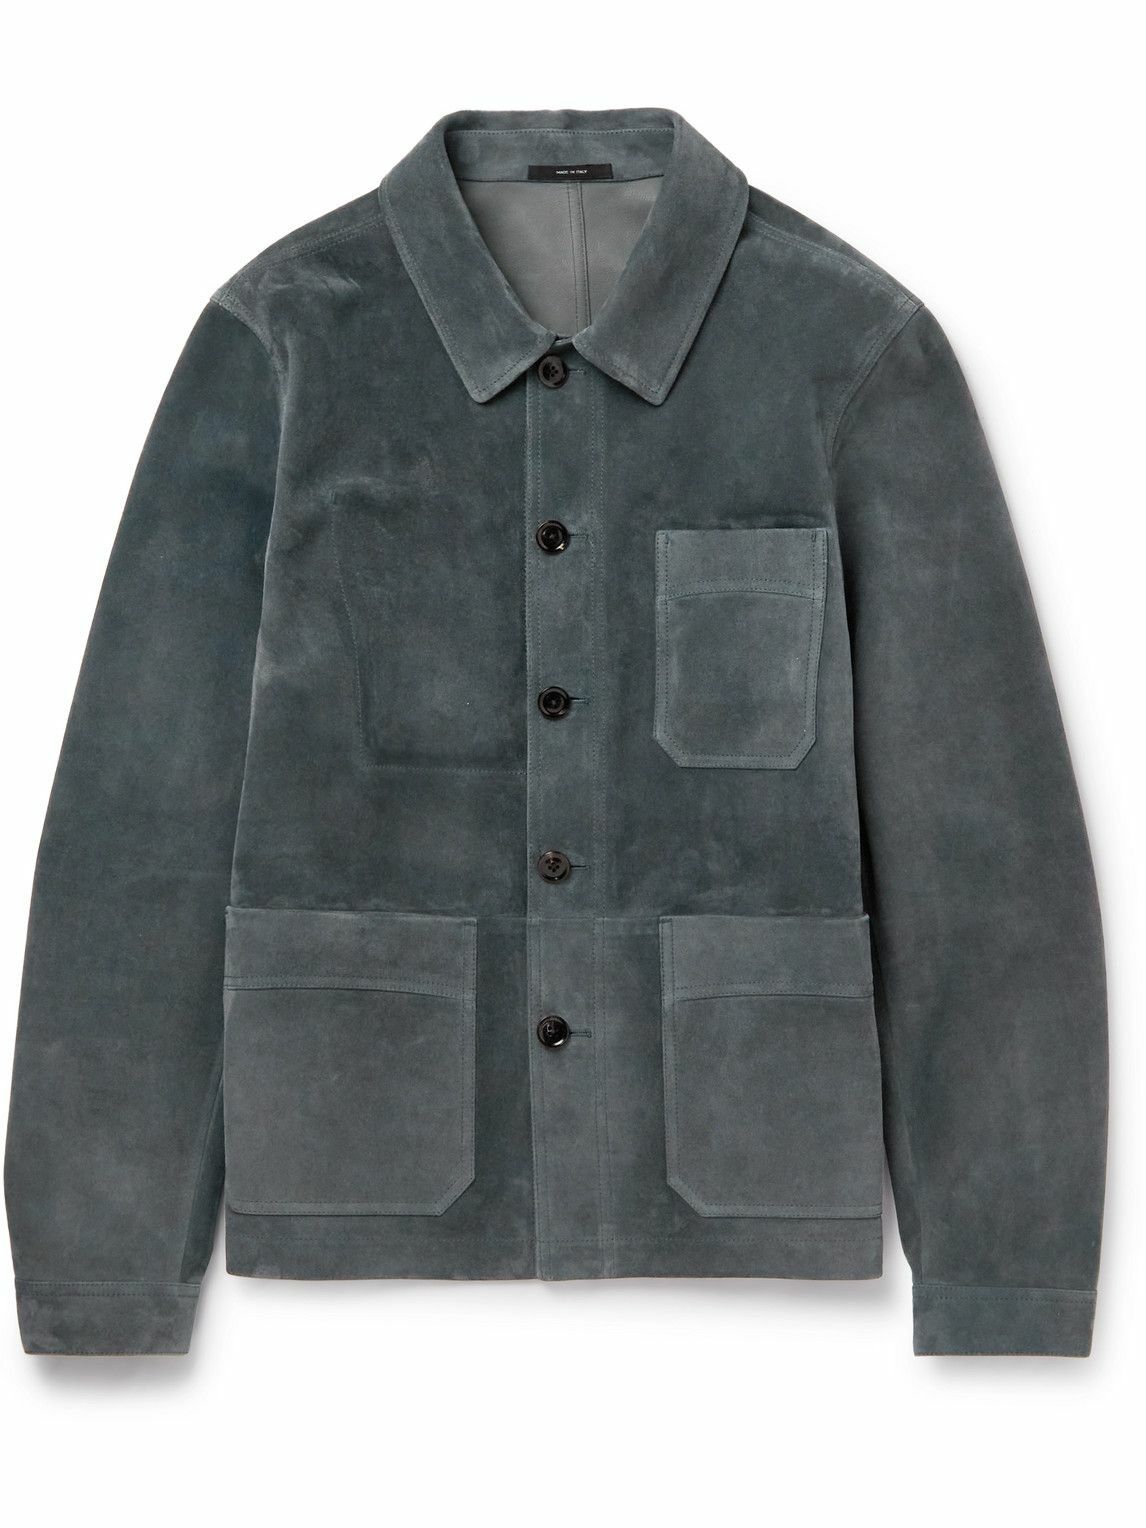 TOM FORD - Suede Chore Jacket - Unknown TOM FORD